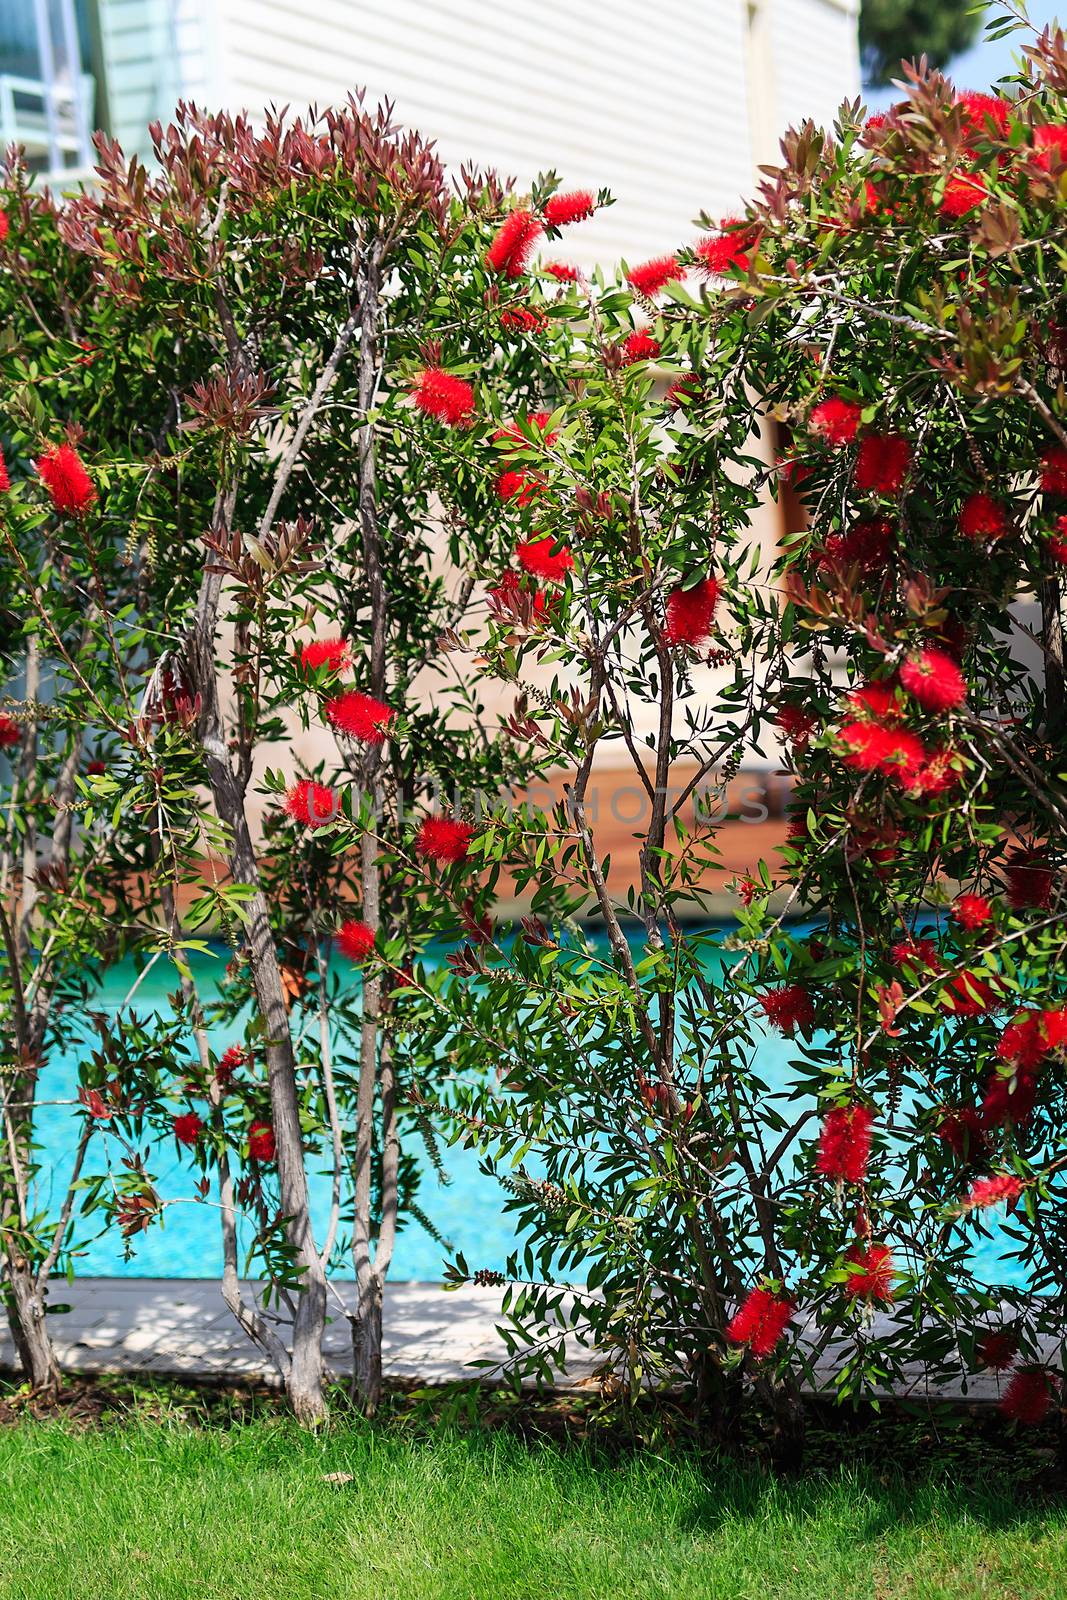 red flowers on tall bushes with green leaves, hotel grounds with swimming pool and trees, summer, day